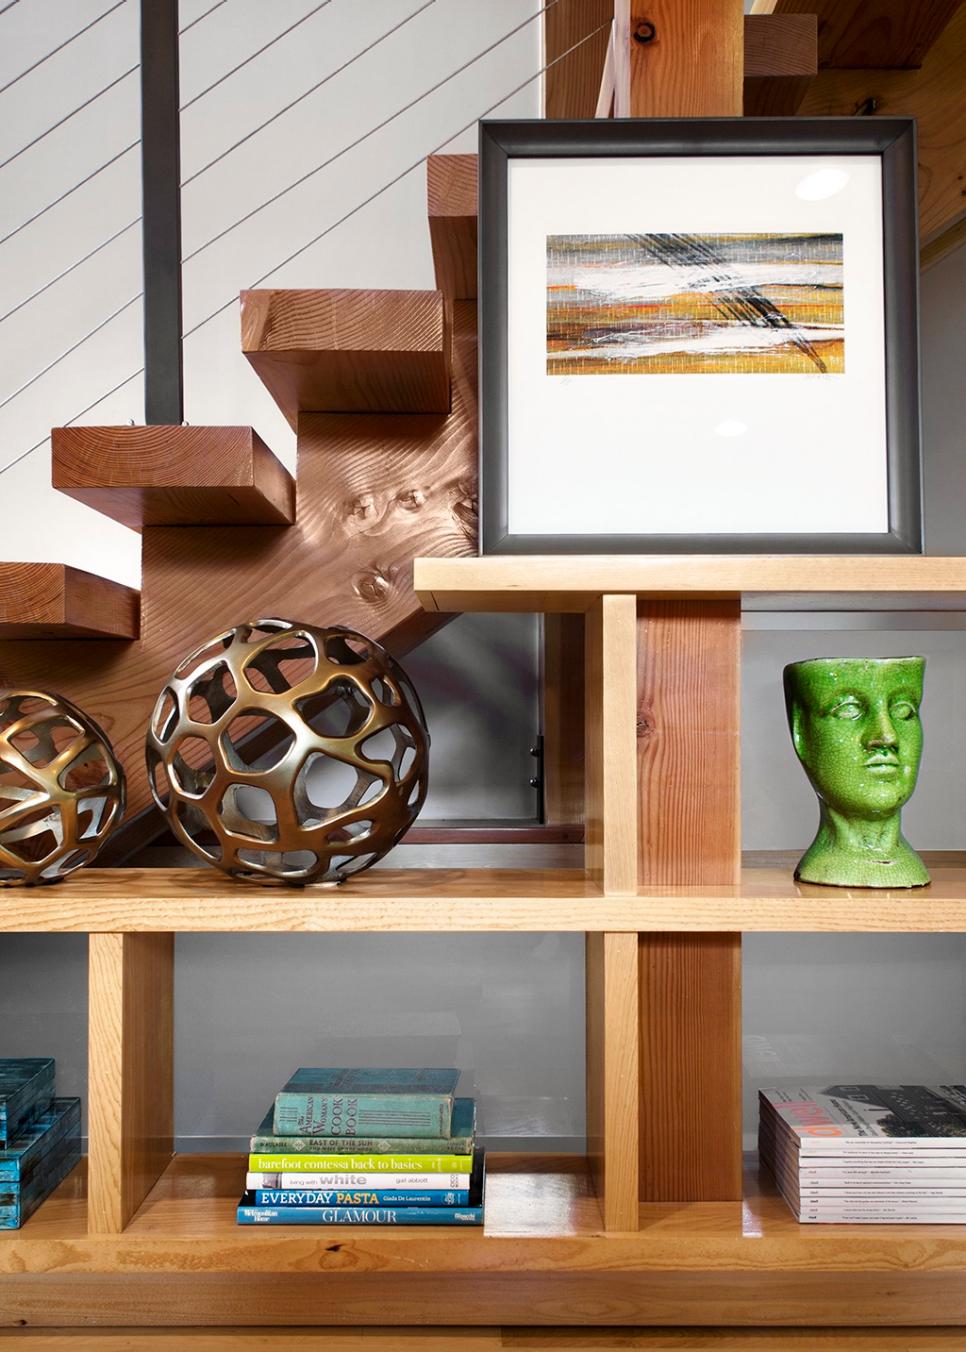 Shelving Unit Against Modern Stairs with Sculptures, Pictures and Books ...